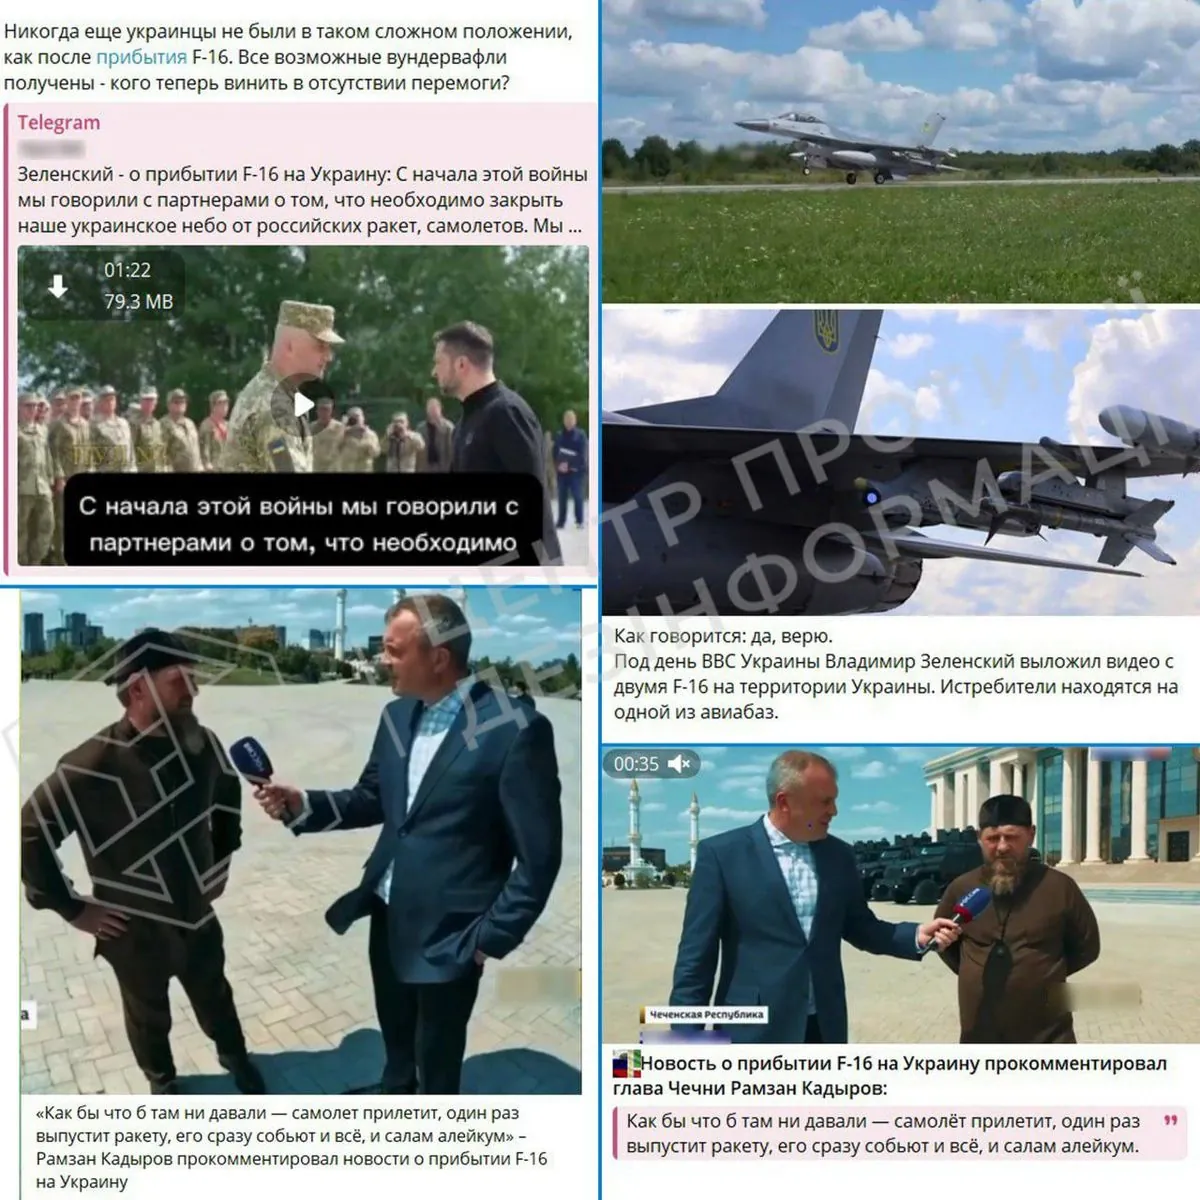 russia is trying to discredit the appearance of F-16 in Ukraine through propagandists - CPJ